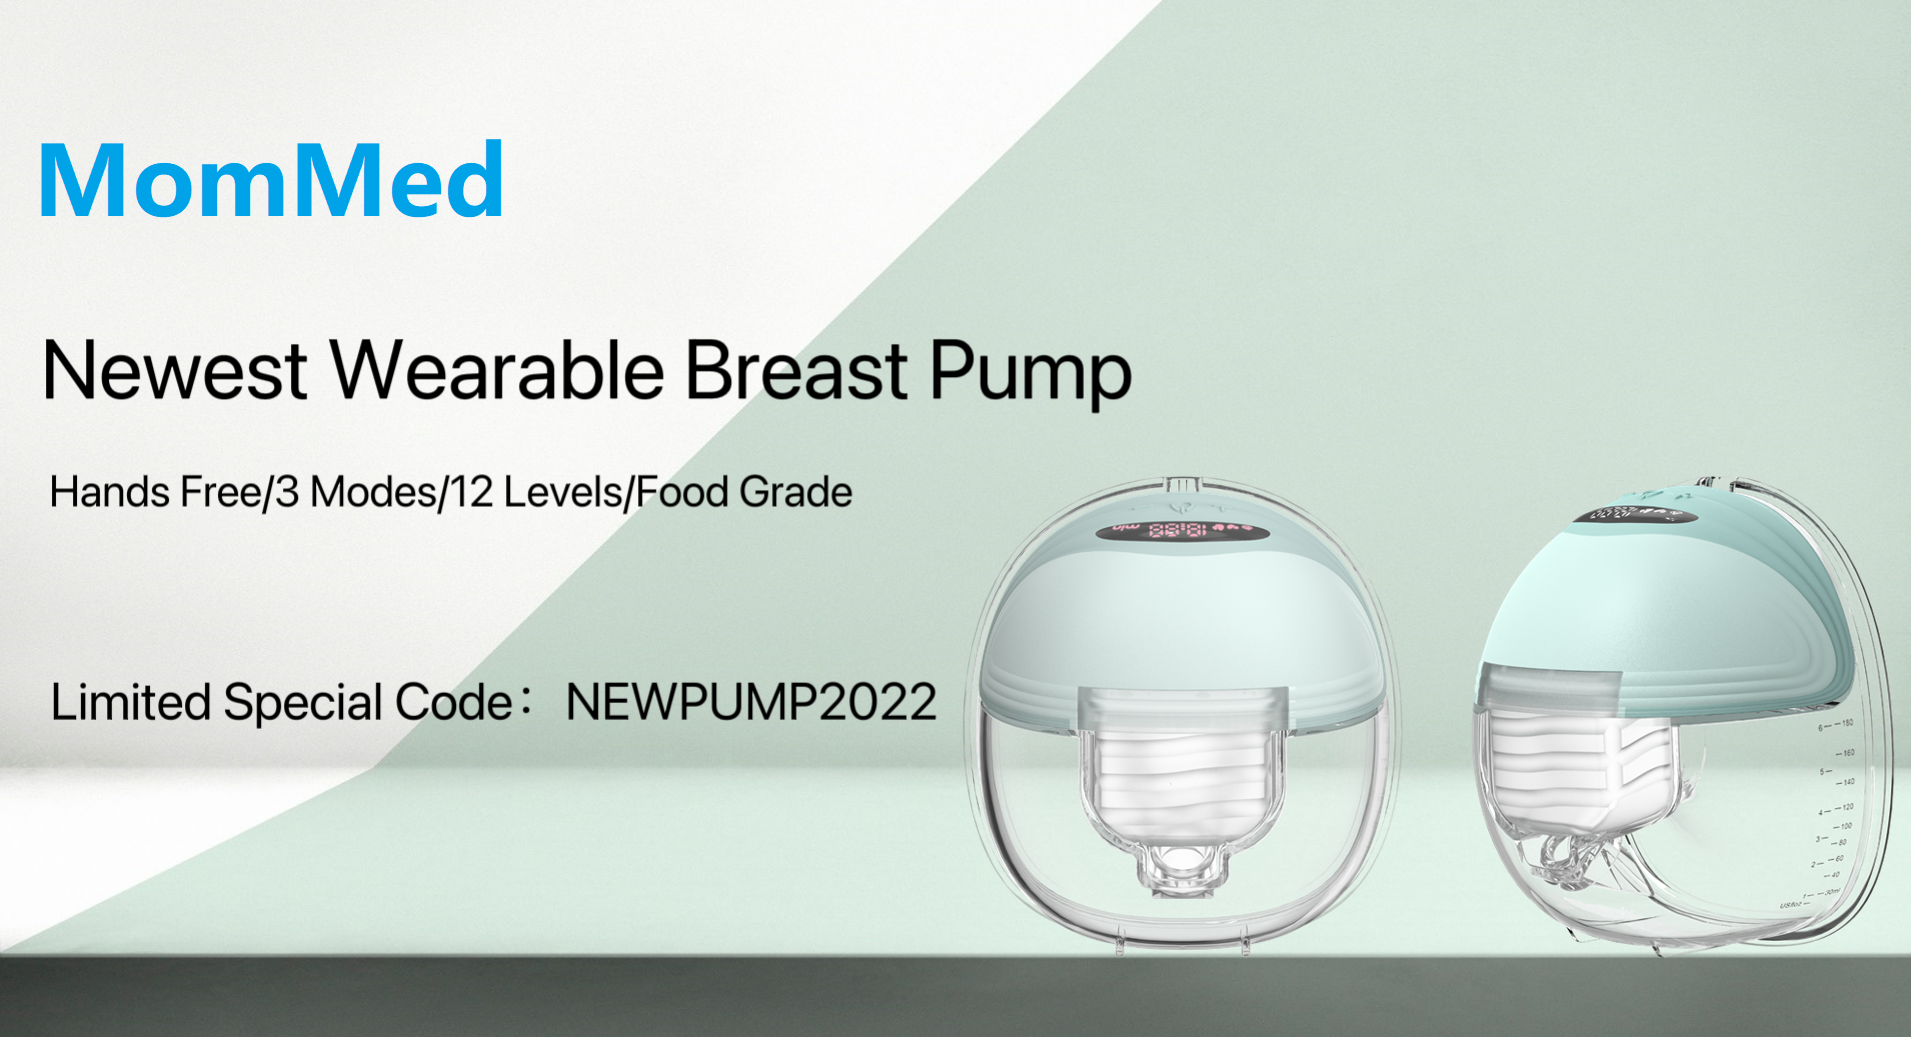 MomMed Announces New Wearable Breast Pump